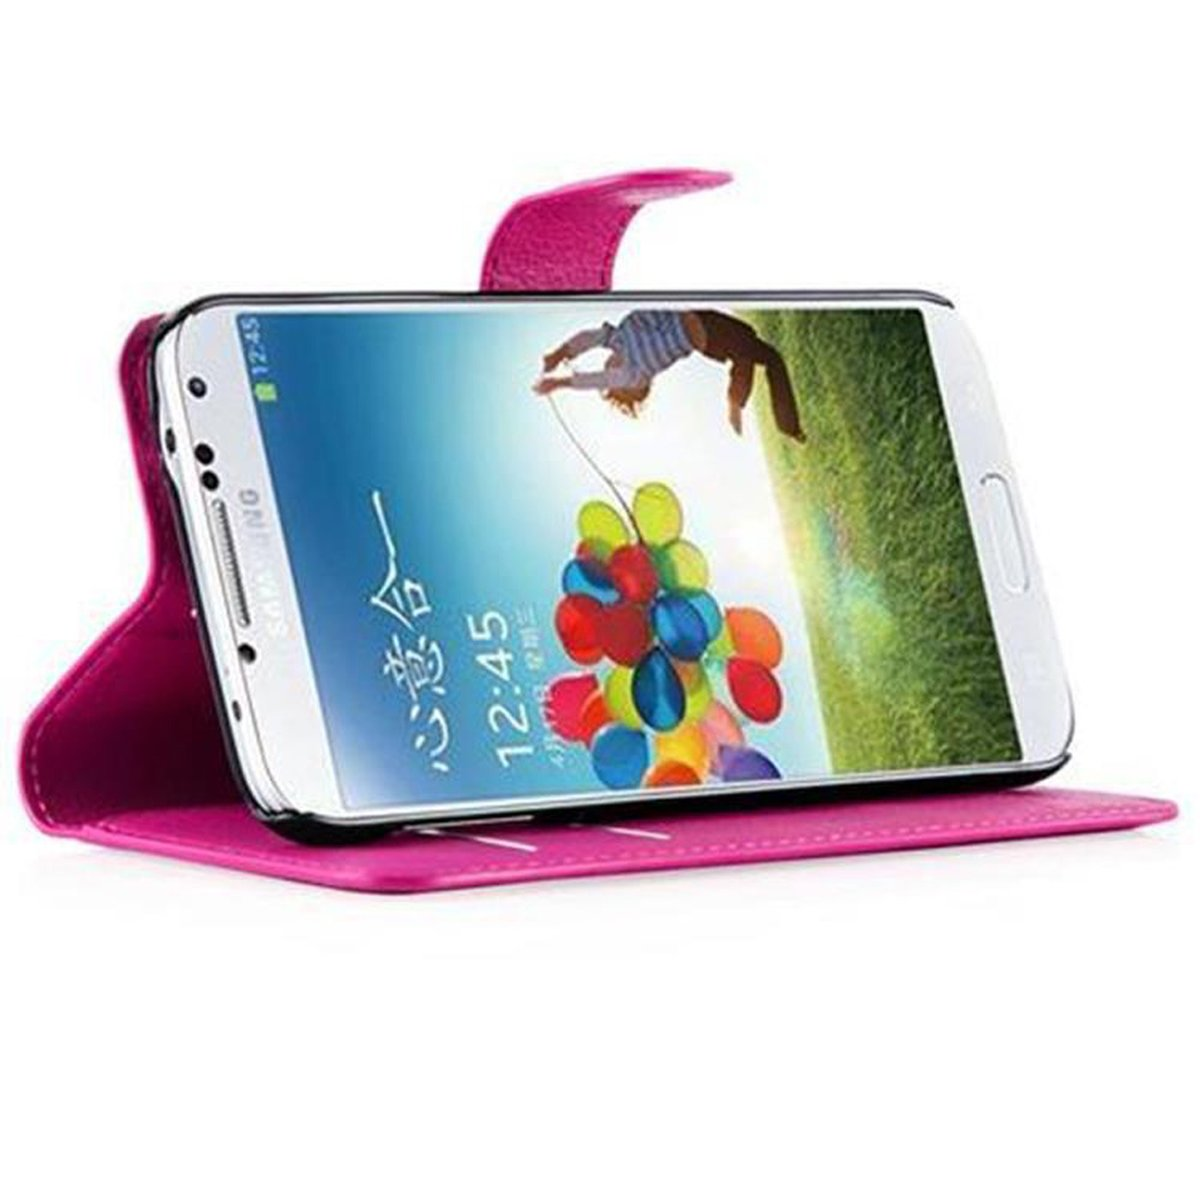 S5 Bookcover, NEO, / CHERRY PINK Samsung, Standfunktion, CADORABO S5 Galaxy Hülle Book